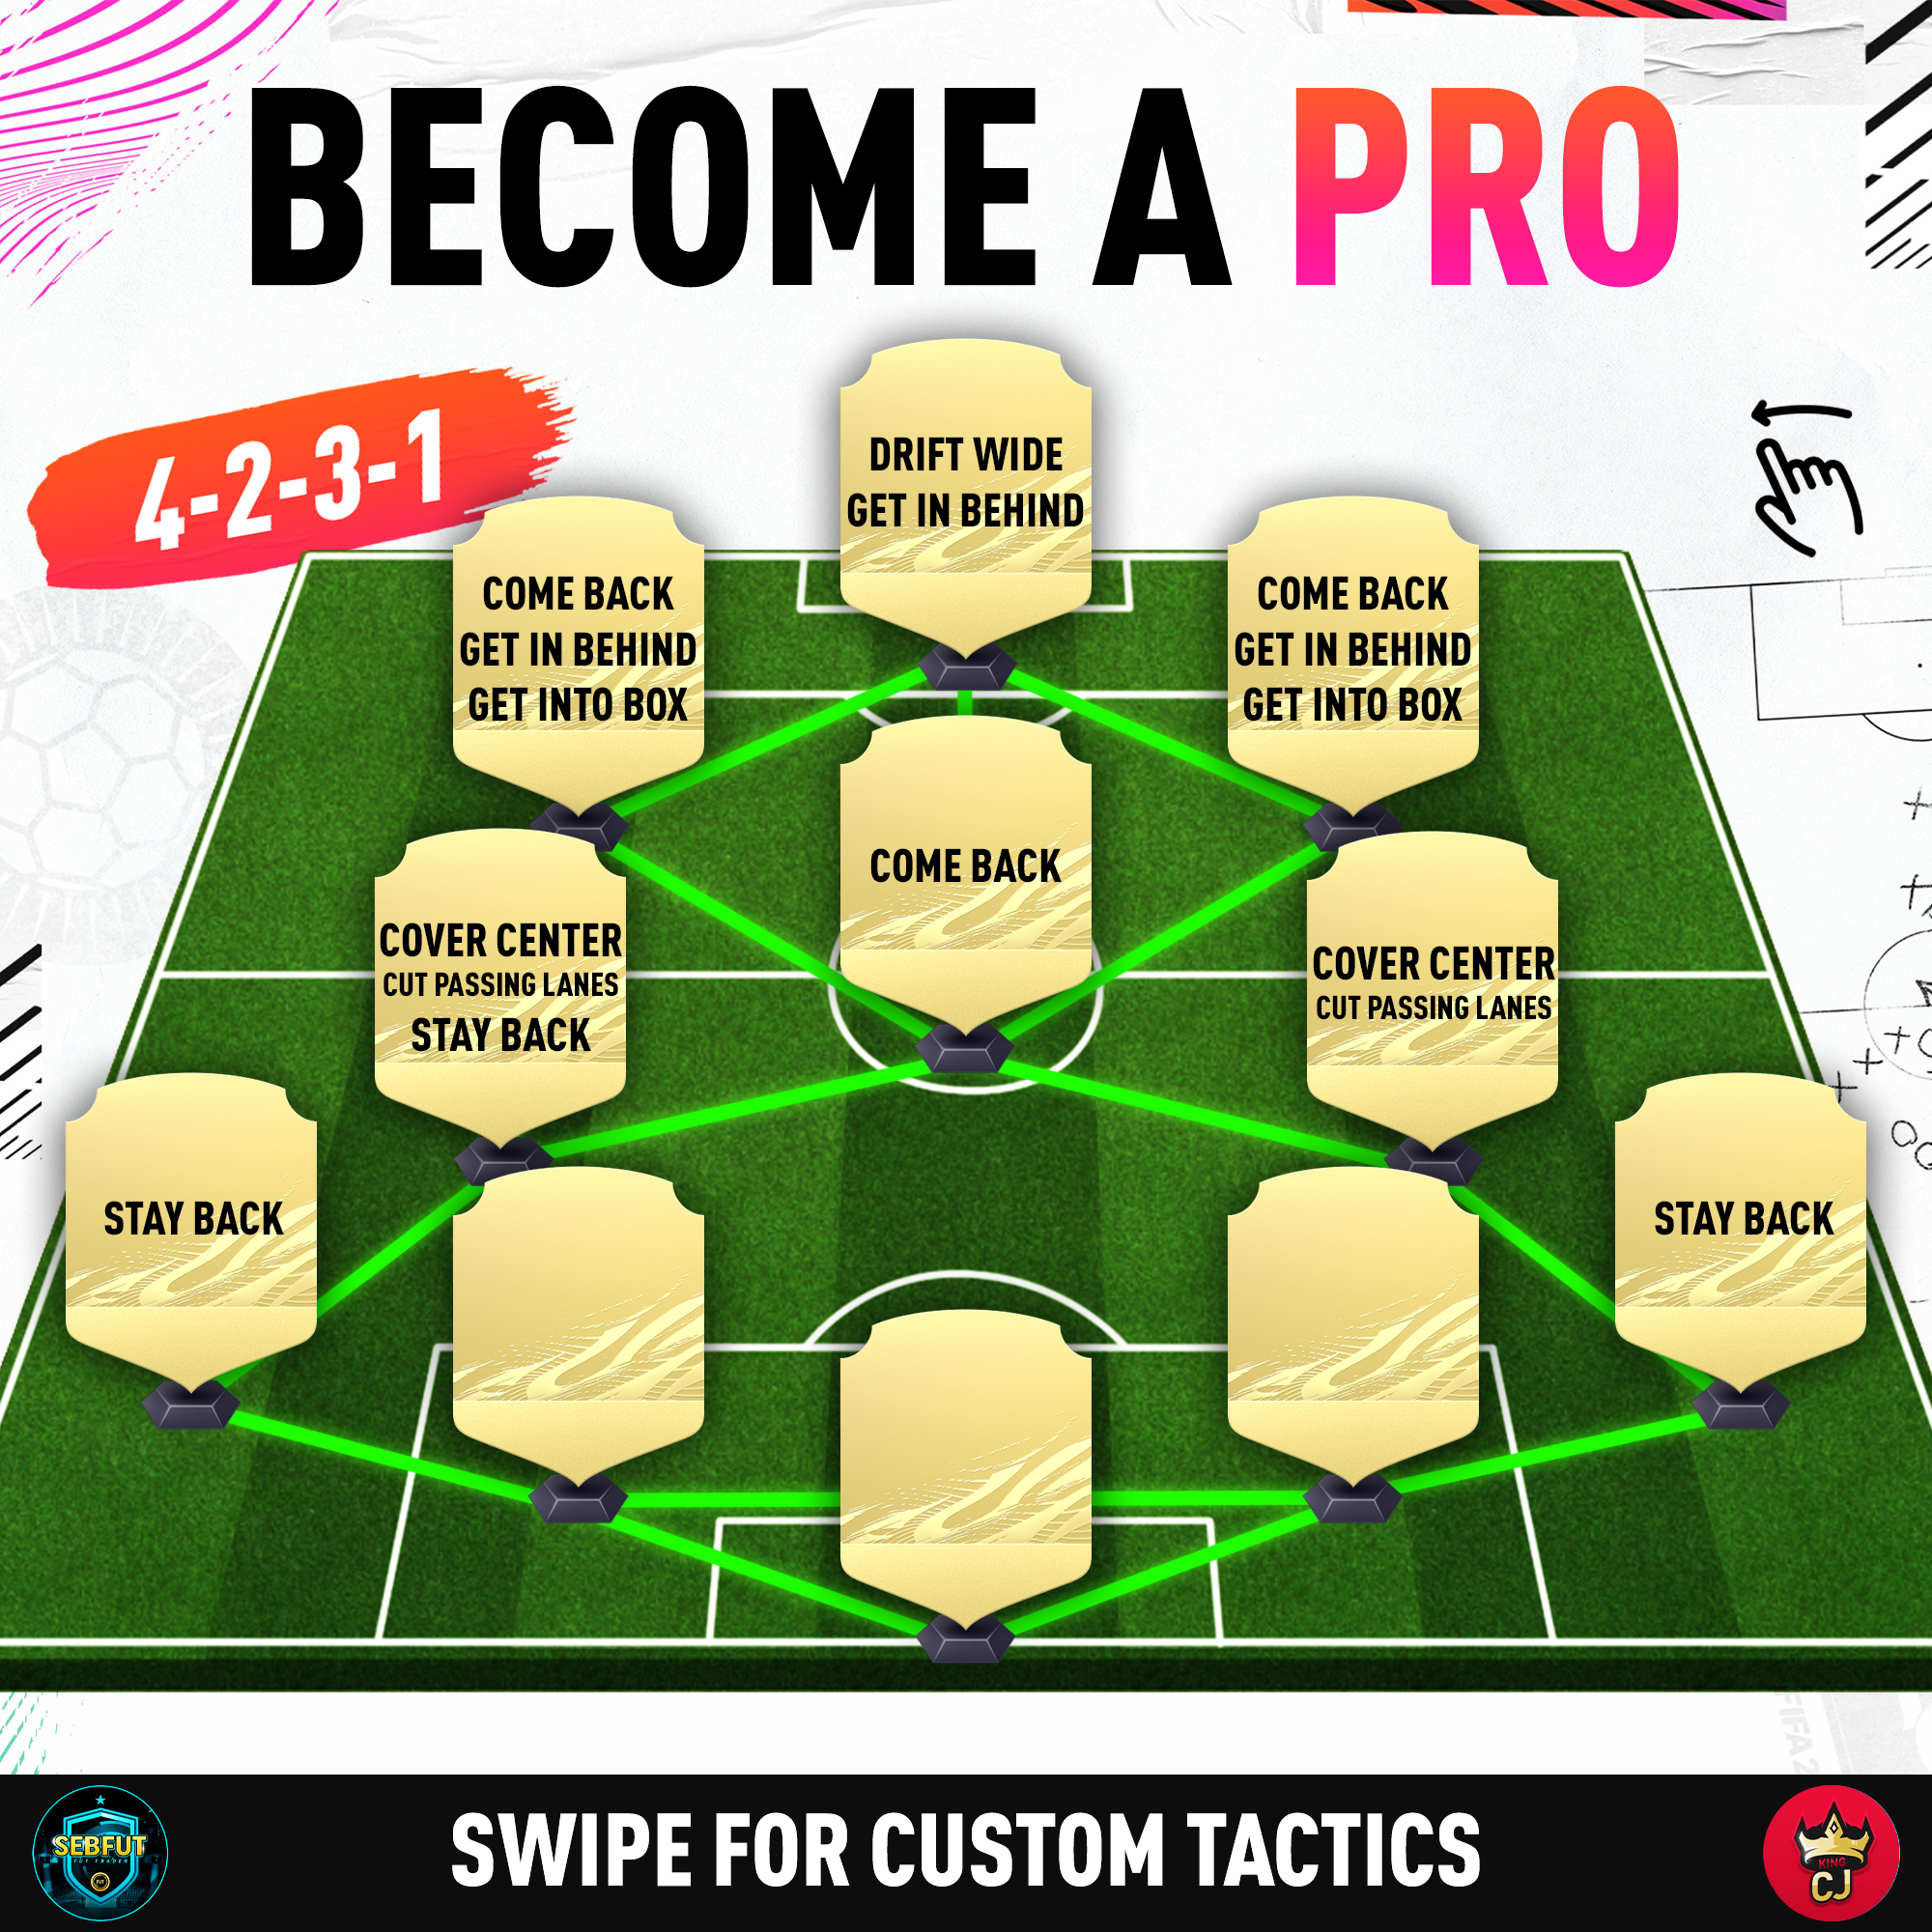 Sebfut 4231 Custom Tactics And Instructions In Fifa21 Collab With Kingcj0 T Co Sxkvgos8km Twitter